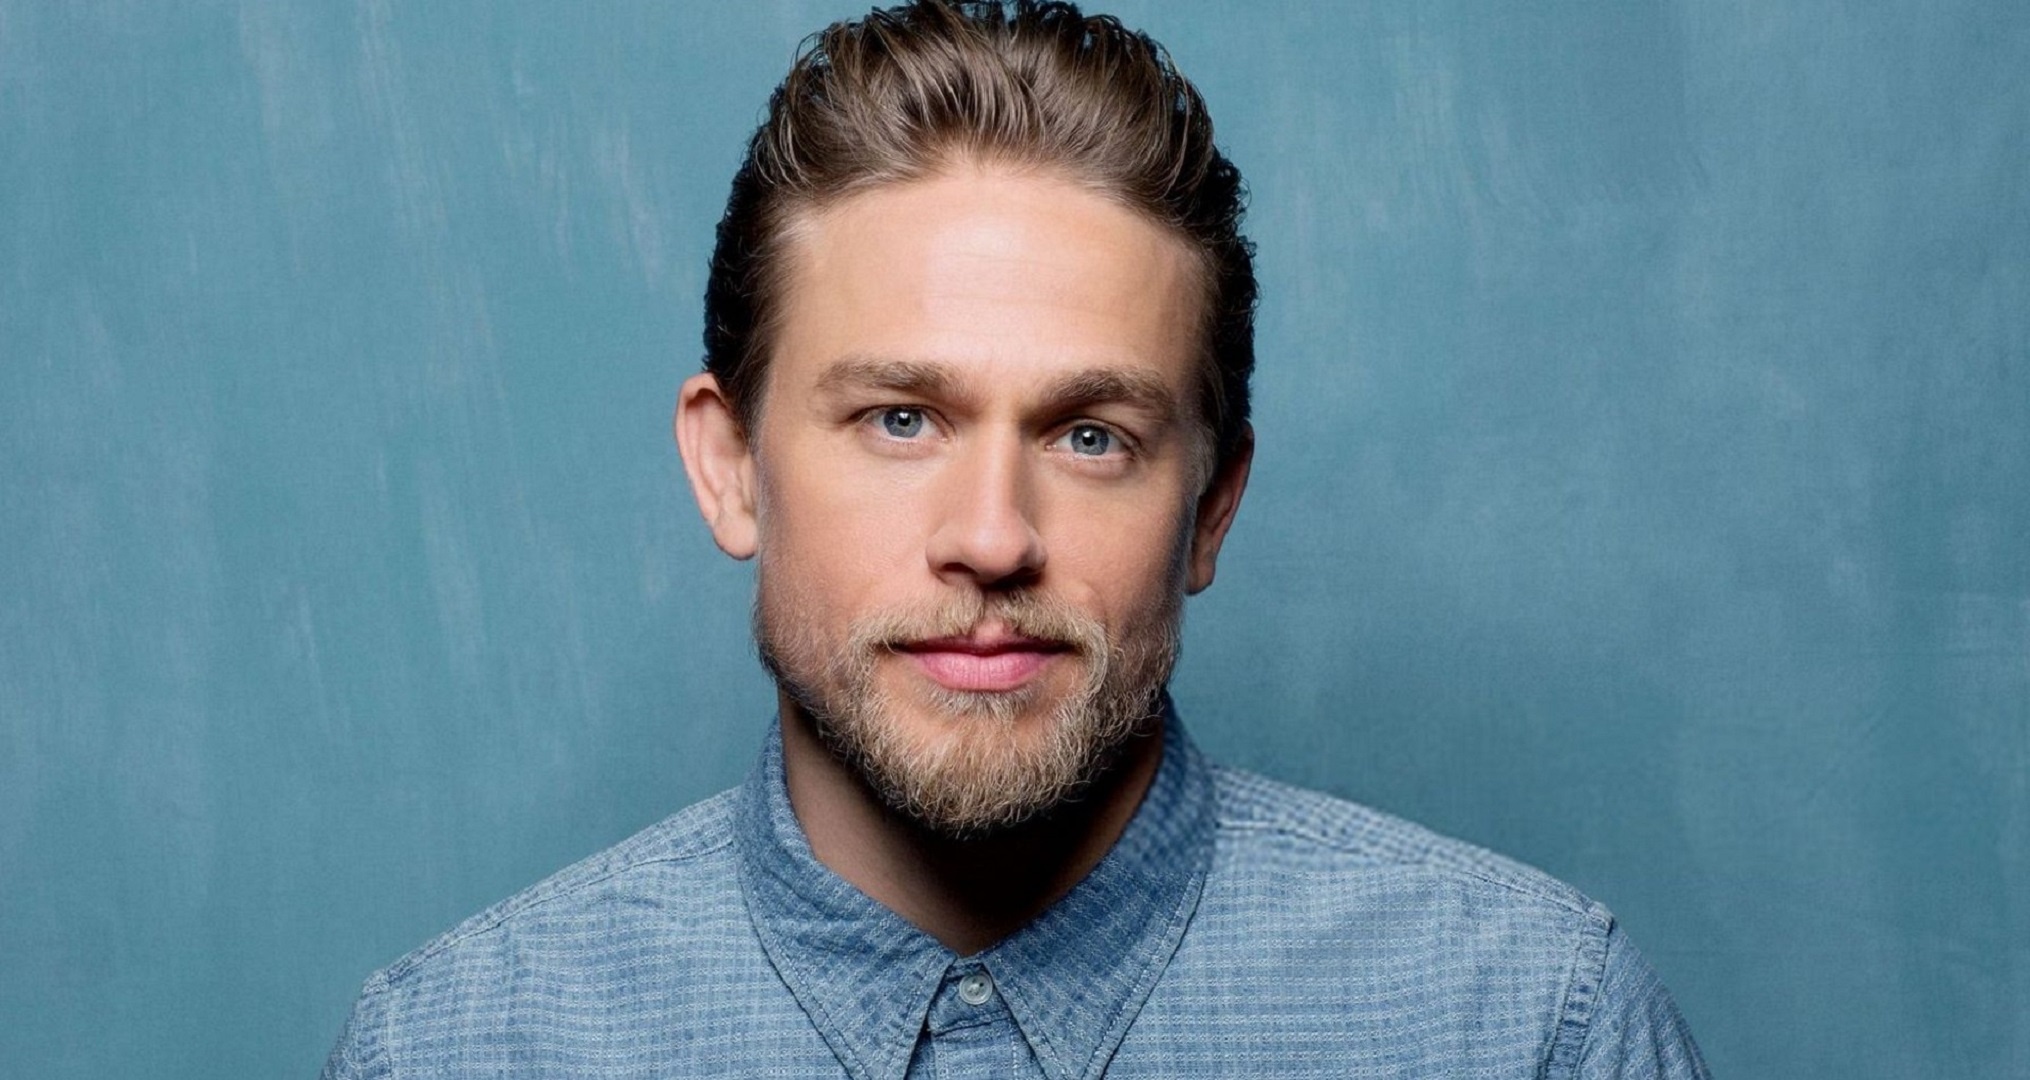 Charlie Hunnam: Celebrity, appearing in film and TV as a motorcycle club member, an English monarch and an explorer. 2030x1080 HD Background.